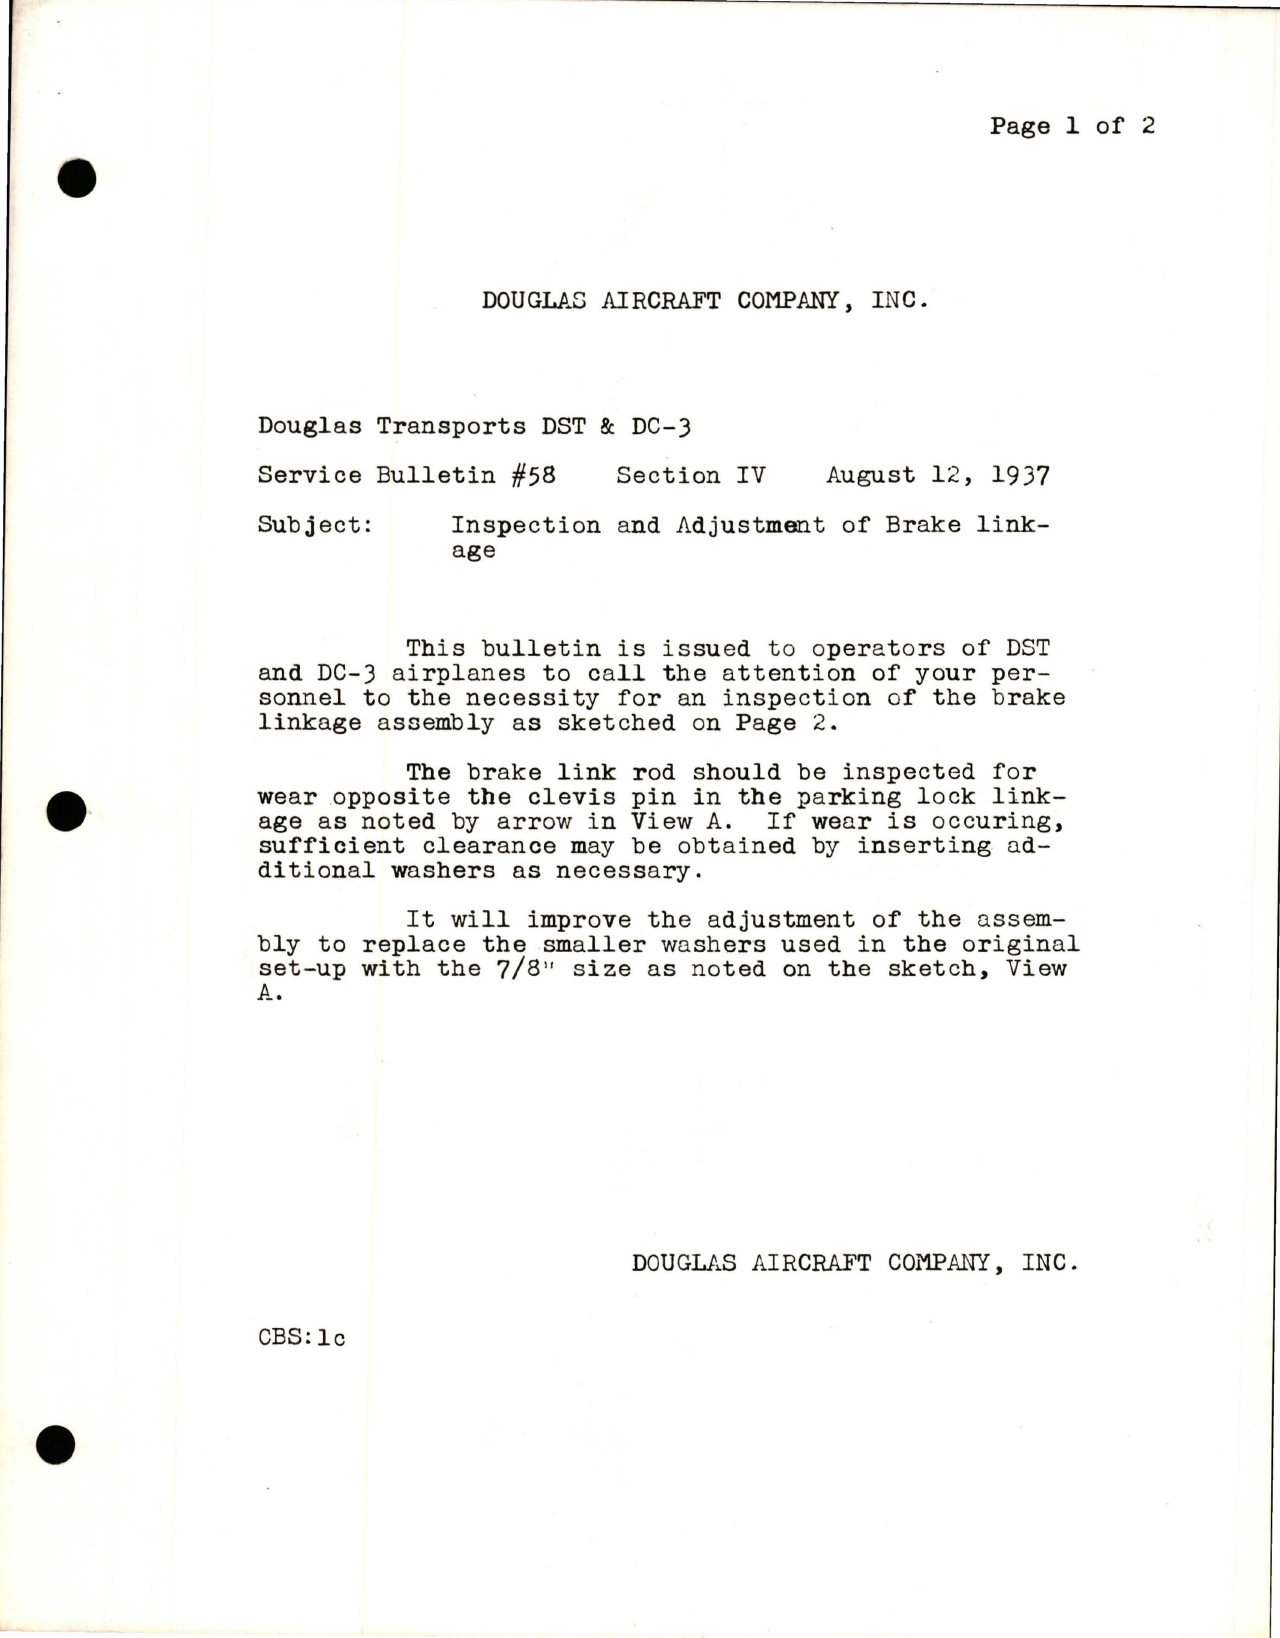 Sample page 1 from AirCorps Library document: Inspection and Adjustment of Brake Linkage